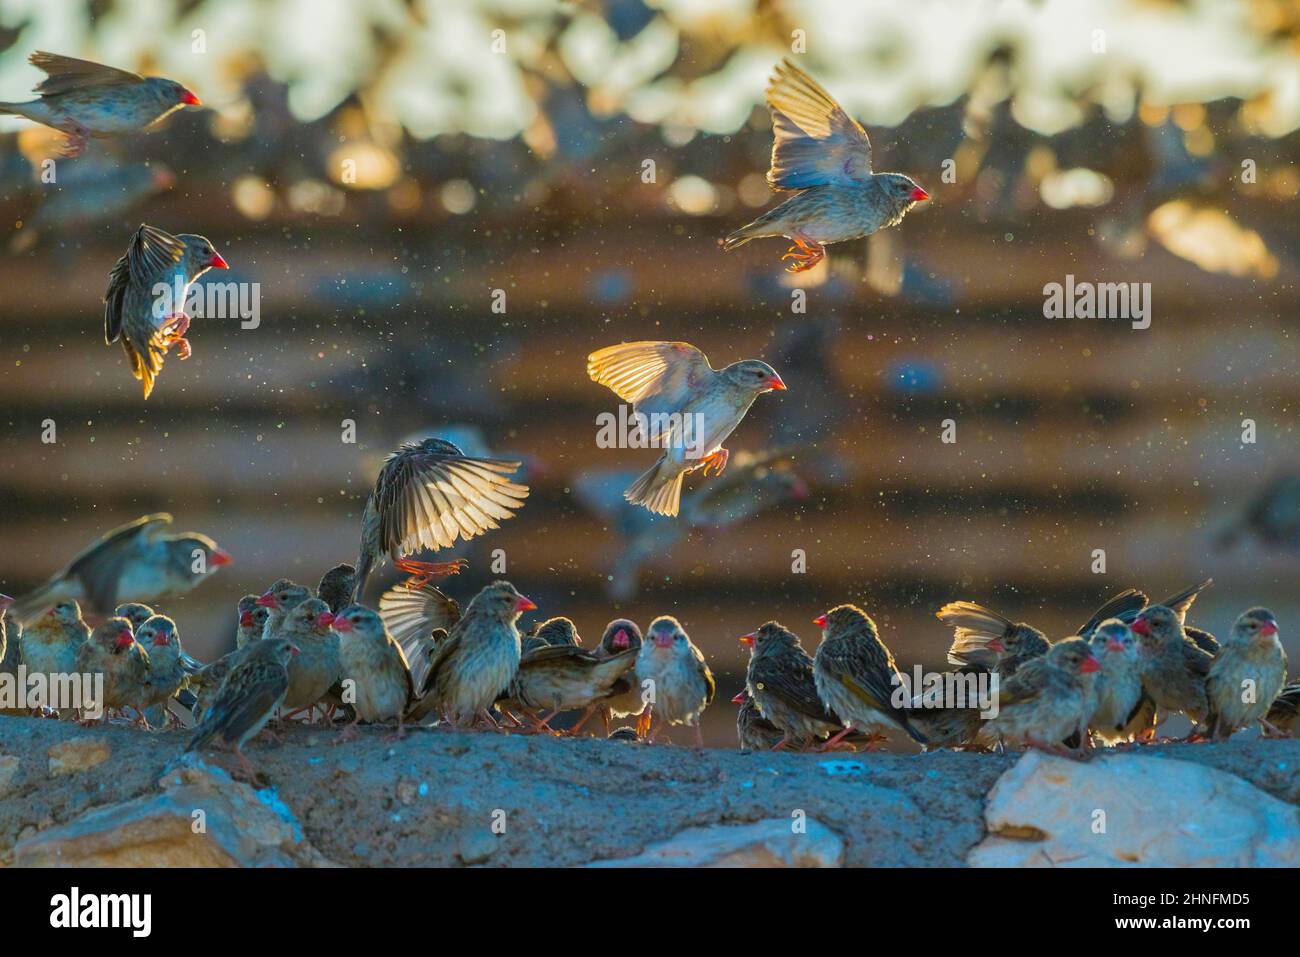 A mega flock of red-billed quelea (Quelea quelea), gather at a water tank, Etosha National Park, Namibia Stock Photo